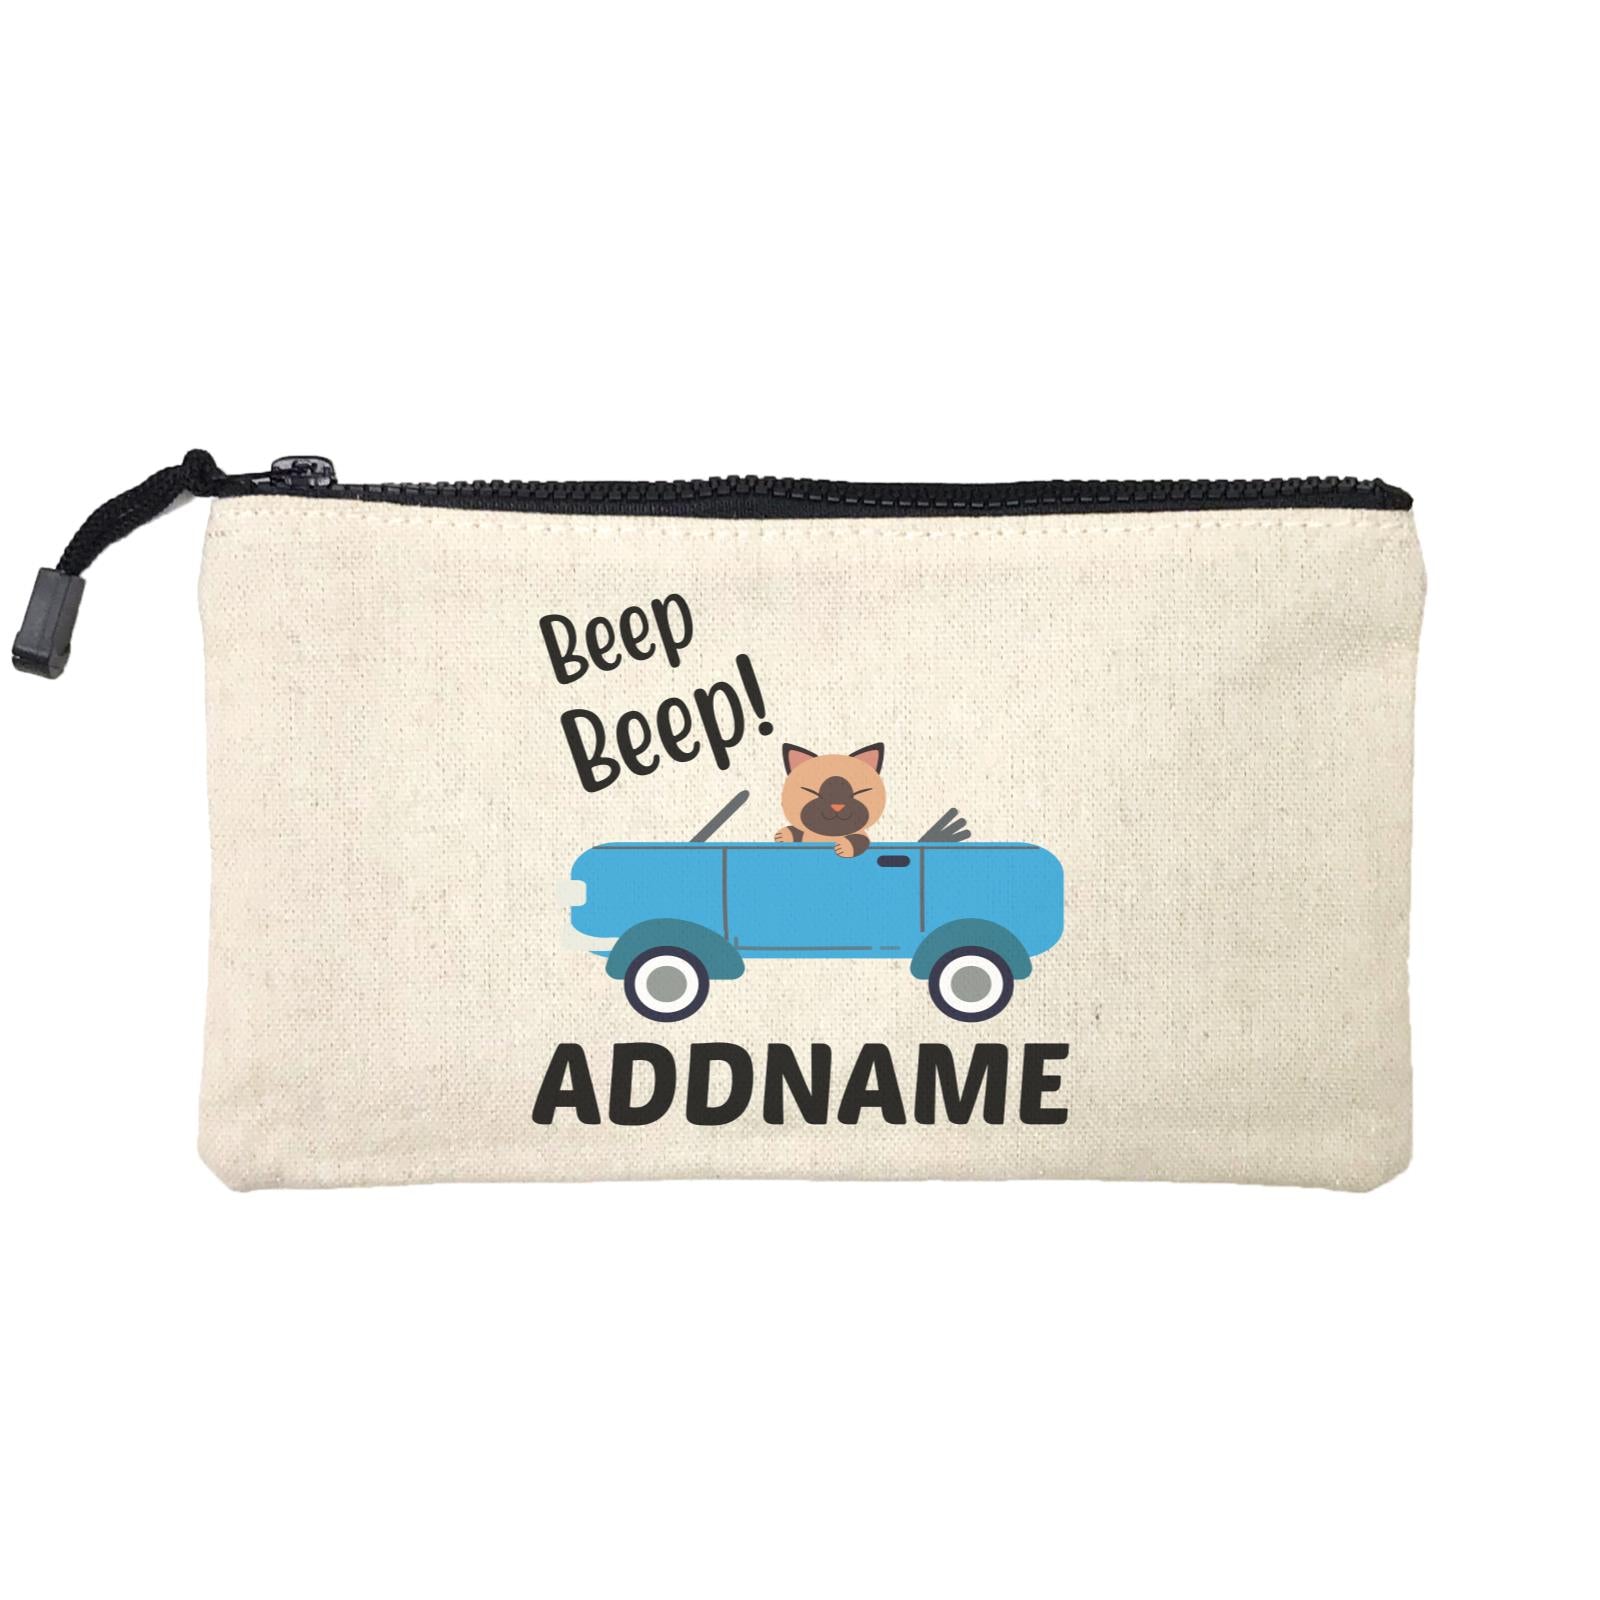 Beep Beep Addname SP Stationery Pouch